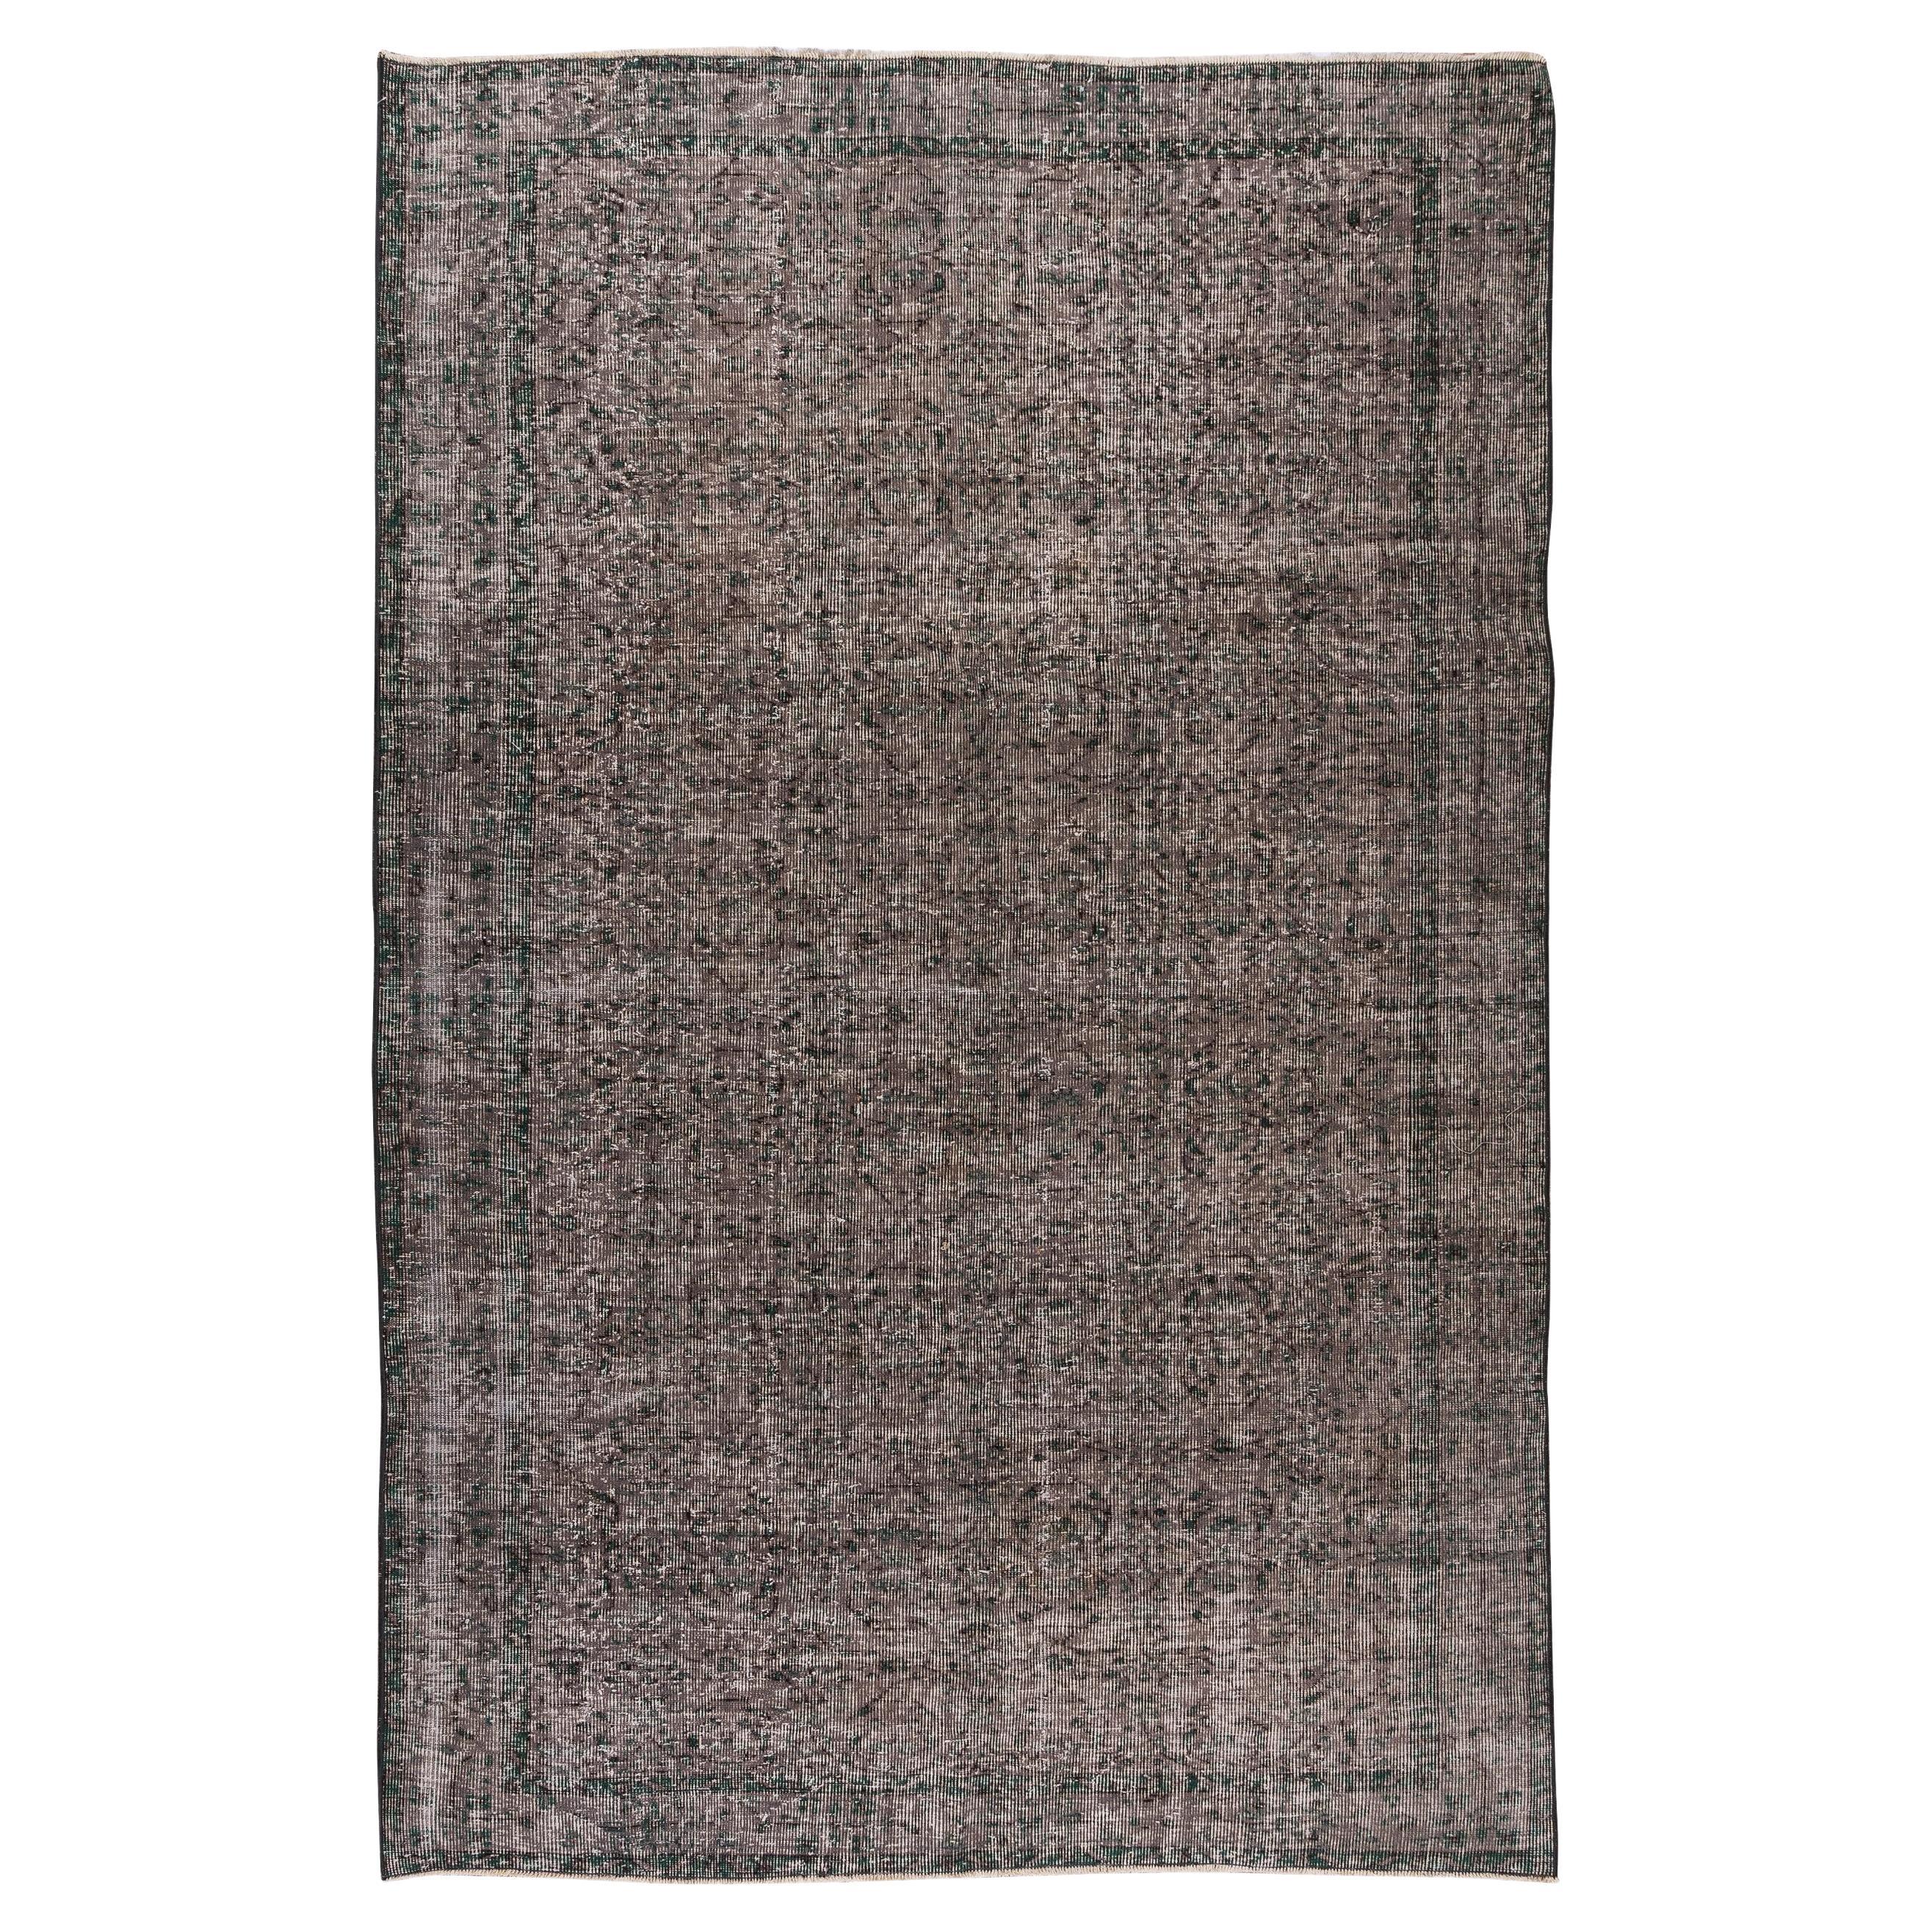 6x8.9 Ft Vintage Rug Over-Dyed in Grey for Modern Interiors, Handmade in Turkey